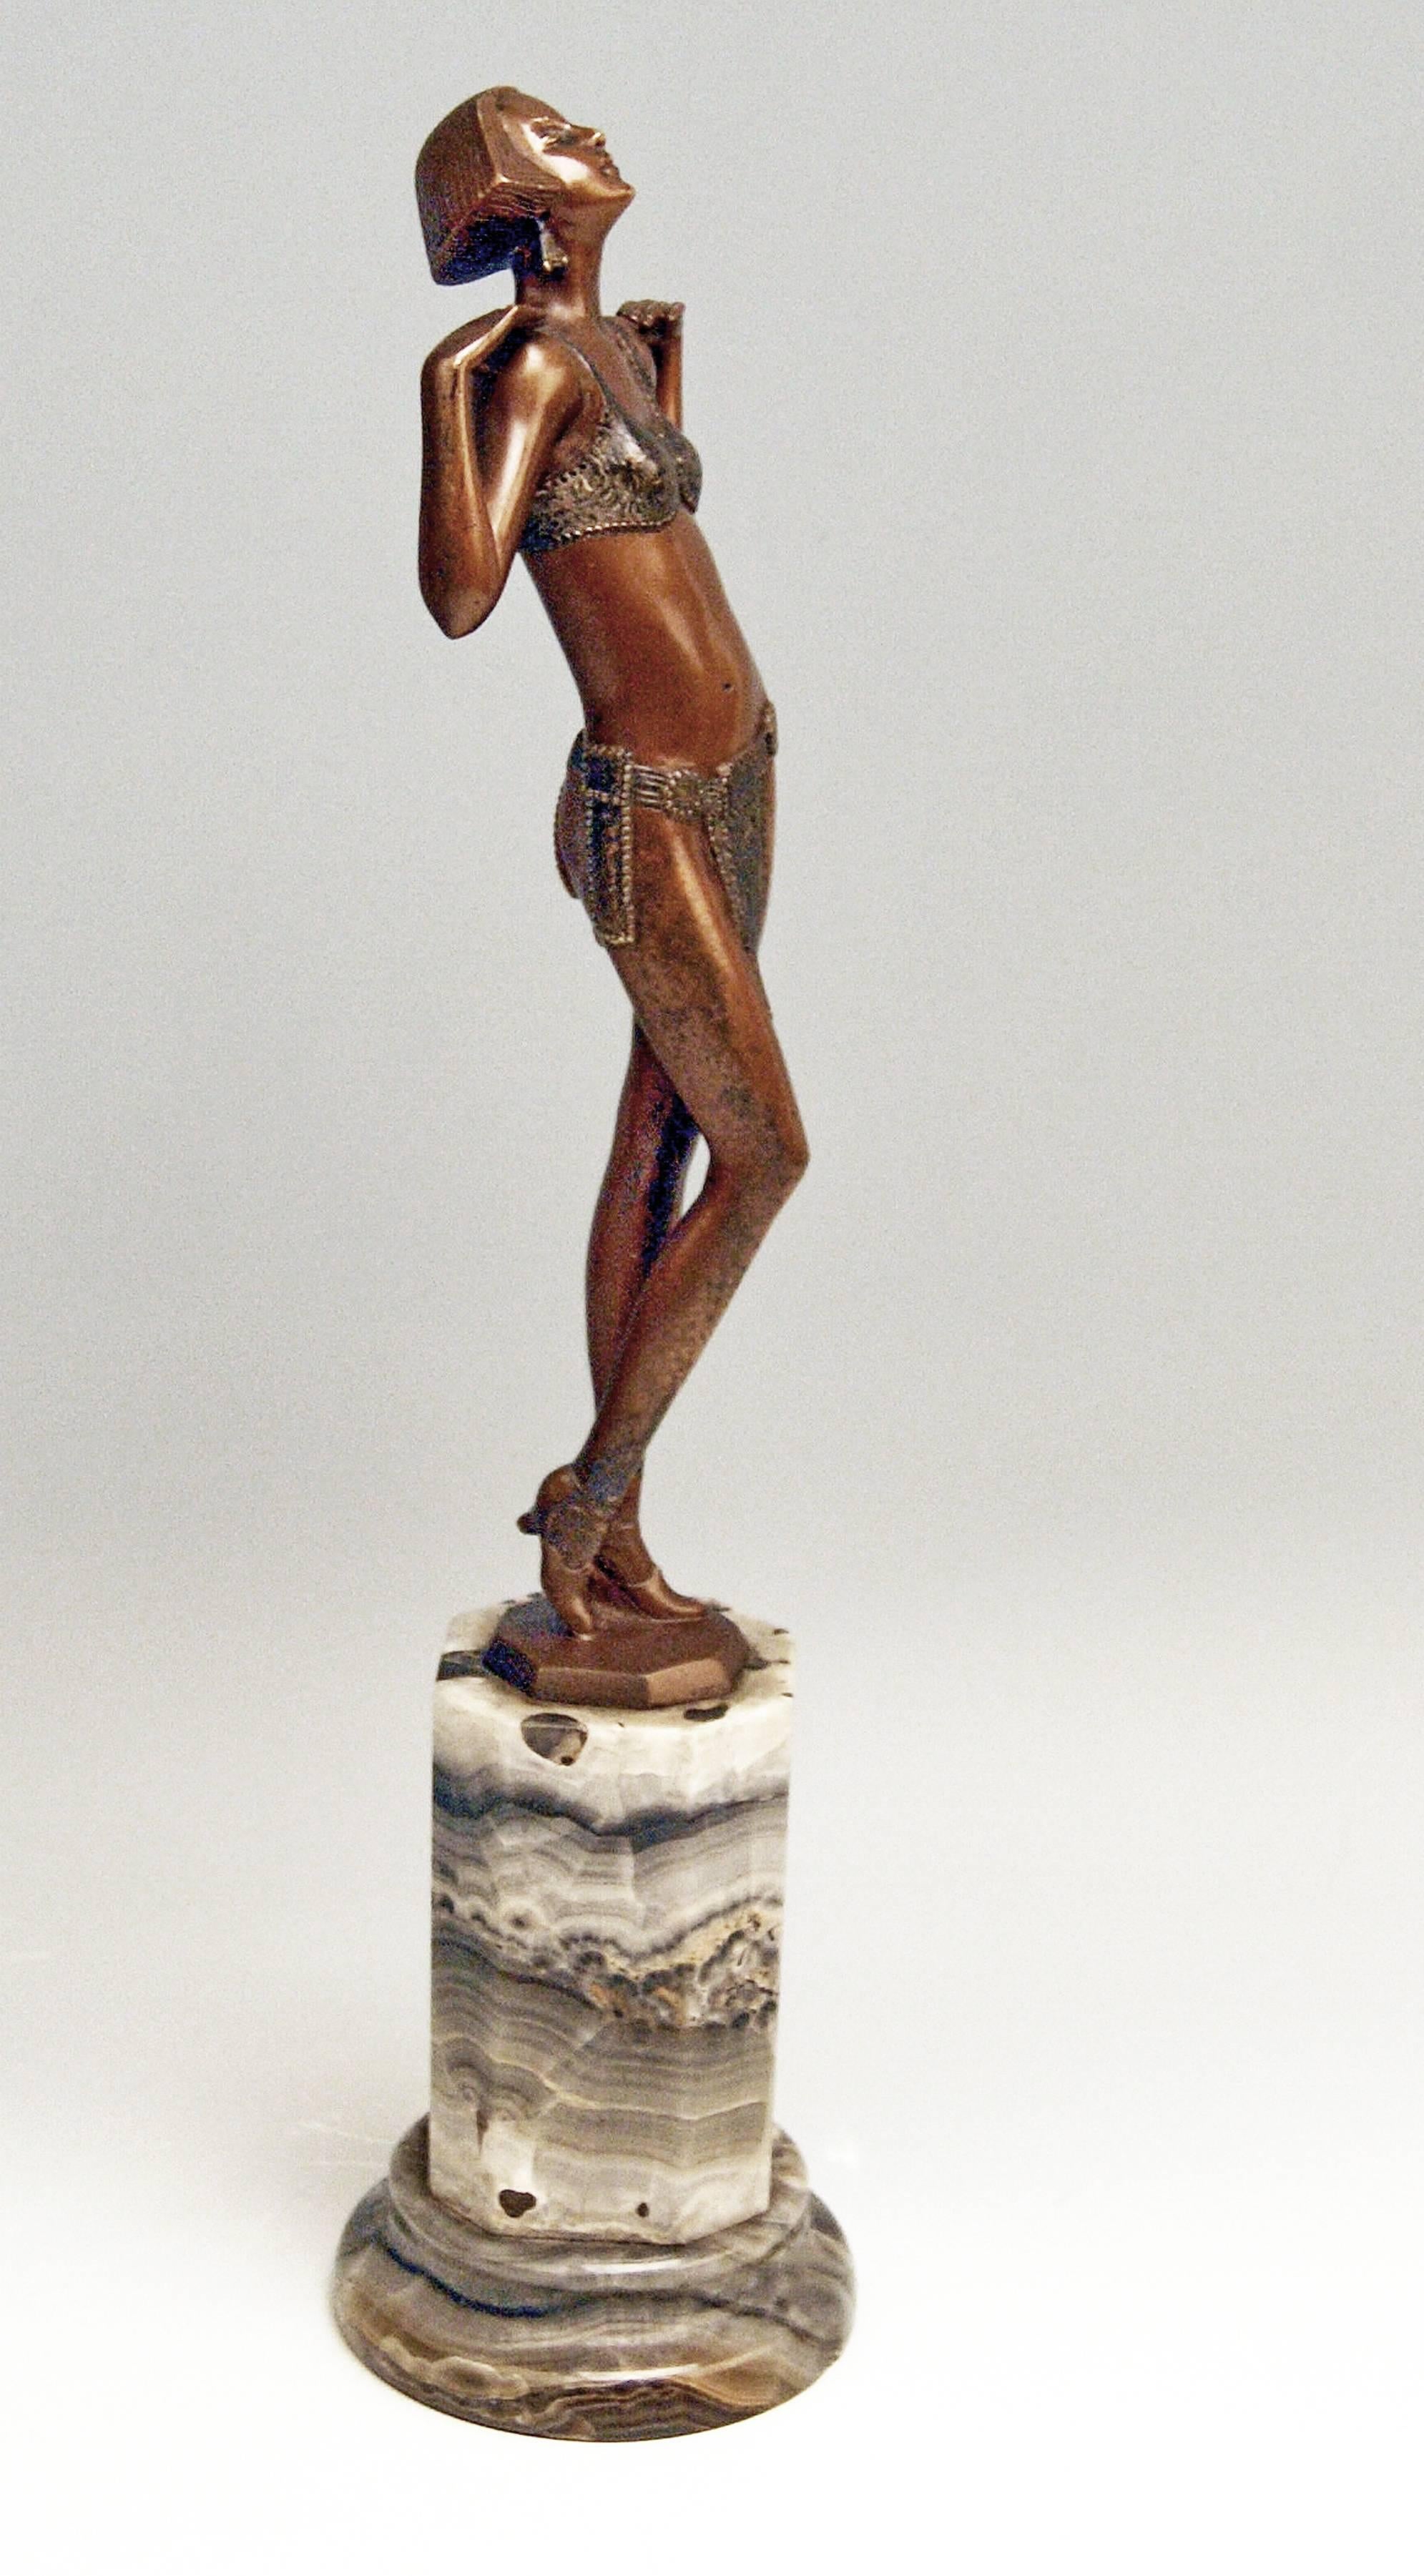 Cold-Painted Vienna Bronze Art Deco Nude Maria Jeritza The Egyptian Helen by Lorenzl 1928